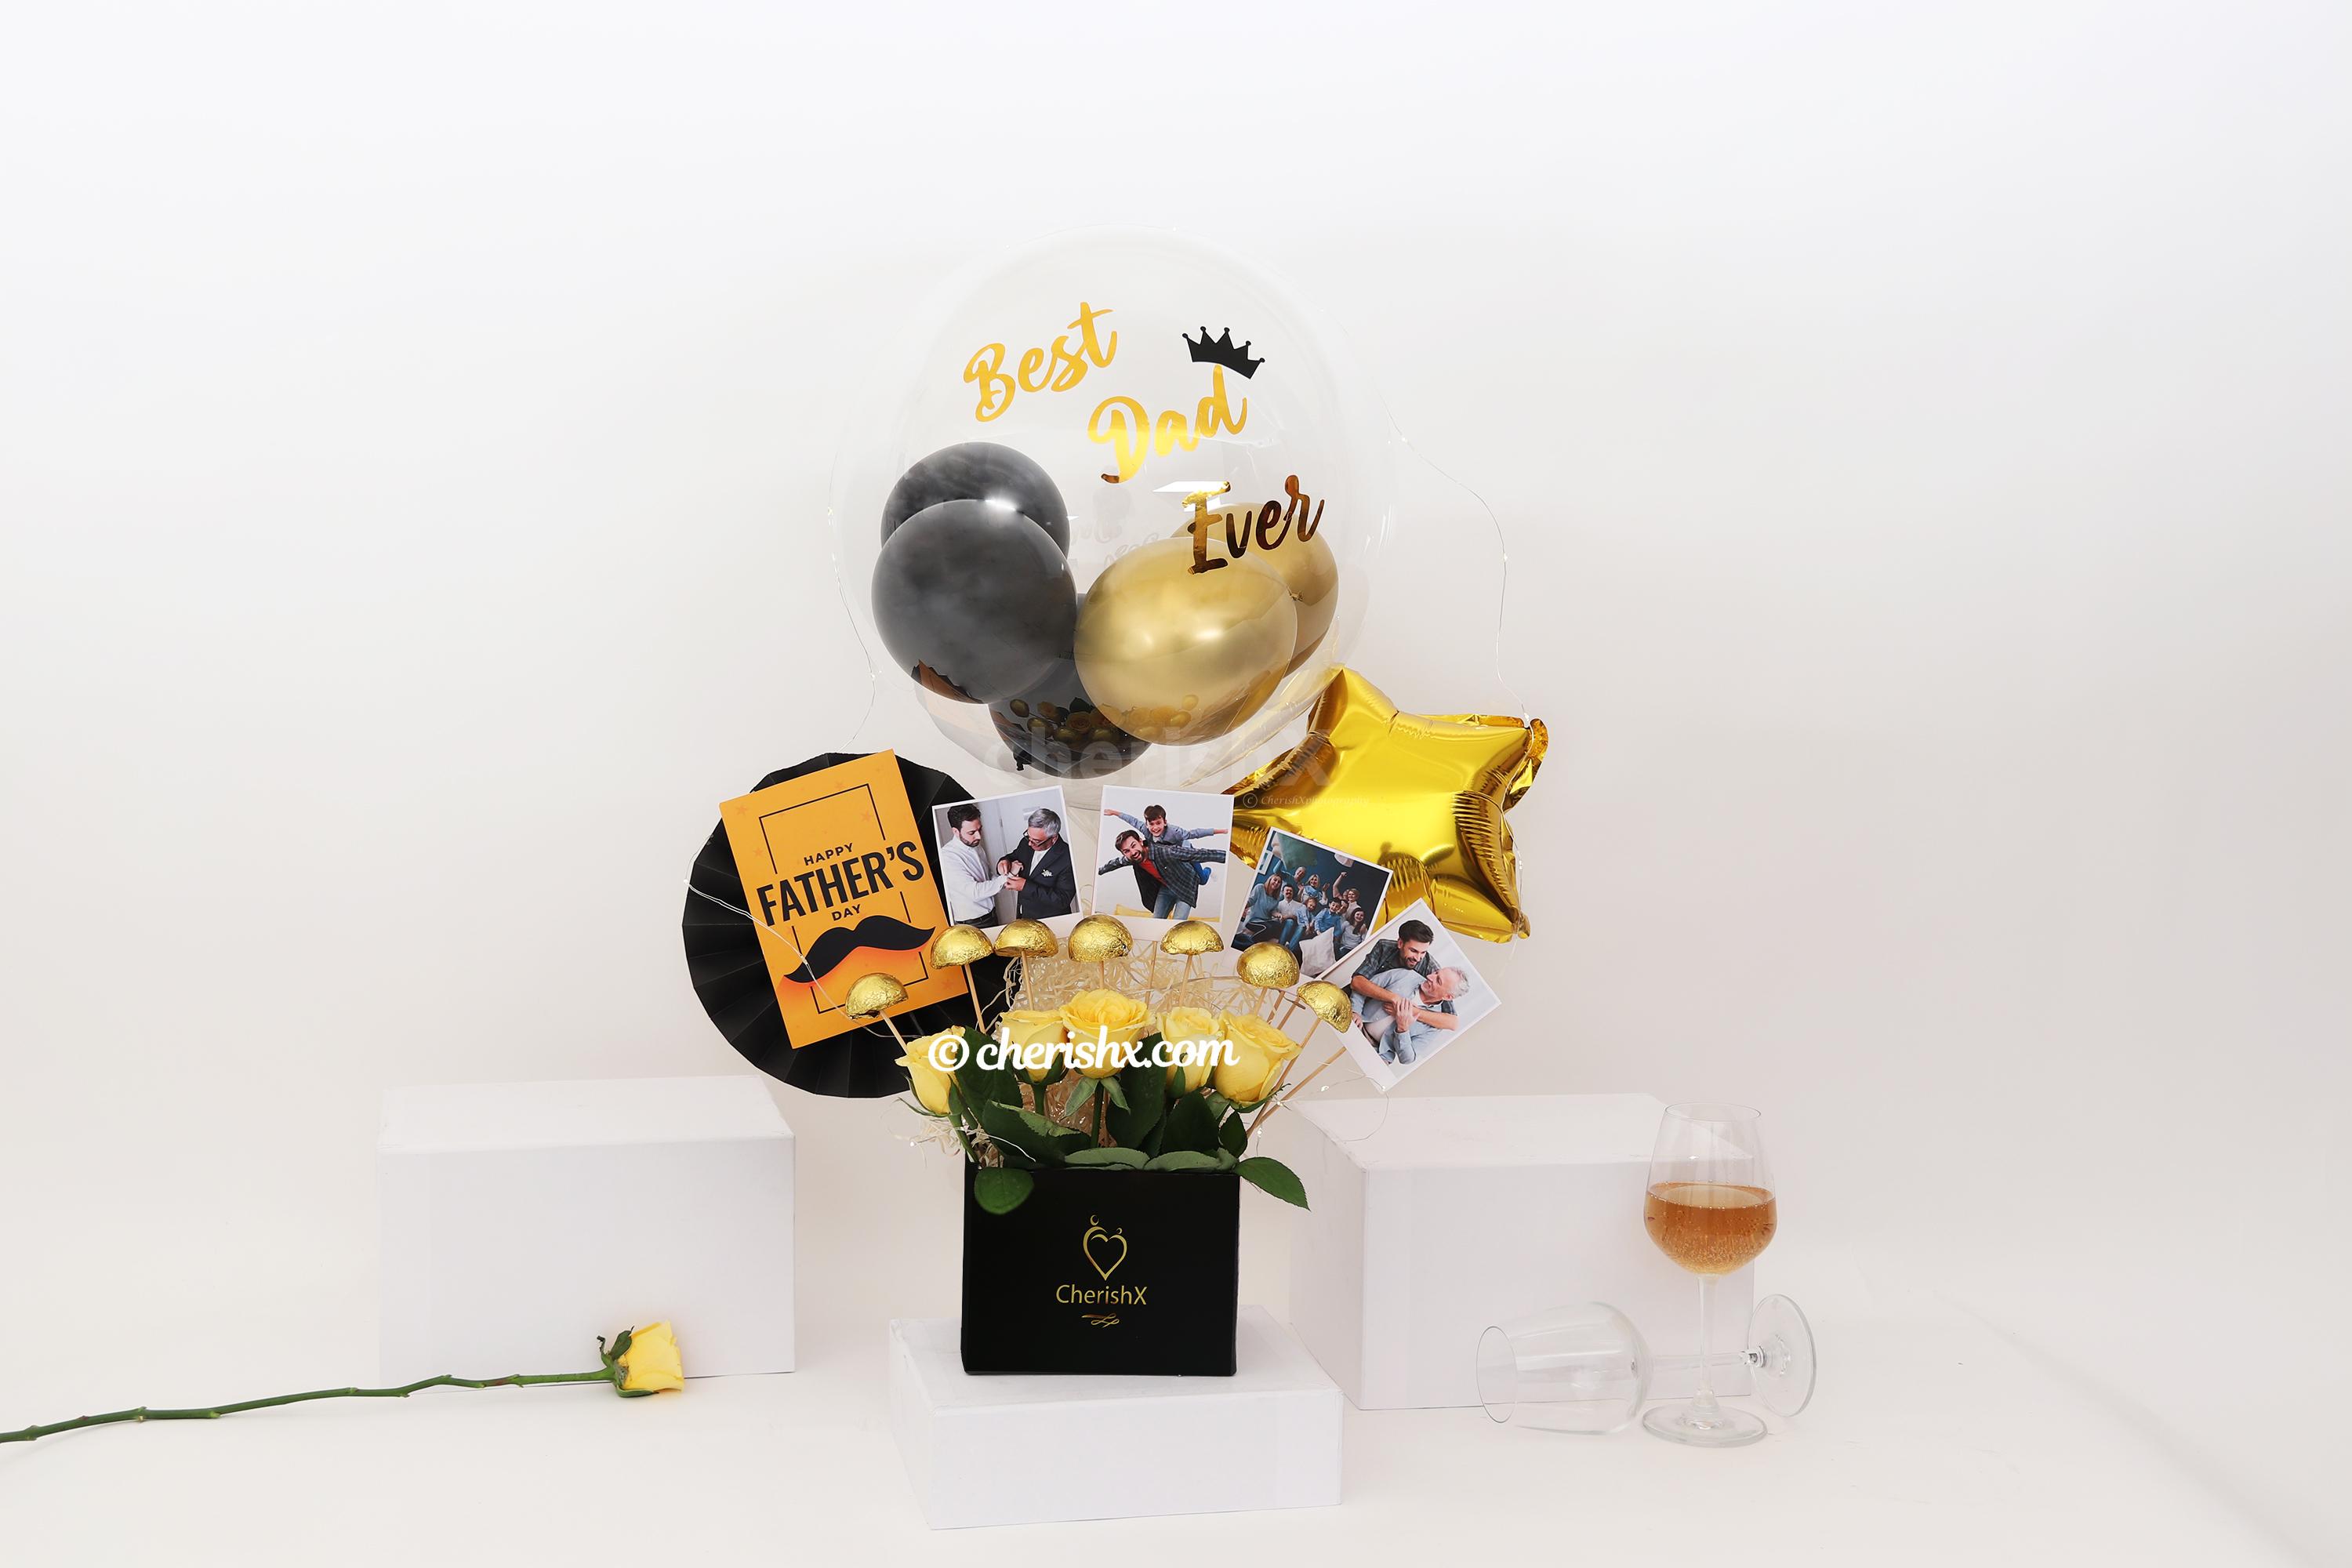 Wish your Father a “Happy Father’s Day” with this Yellow Roses and chocolate filled photobucket!